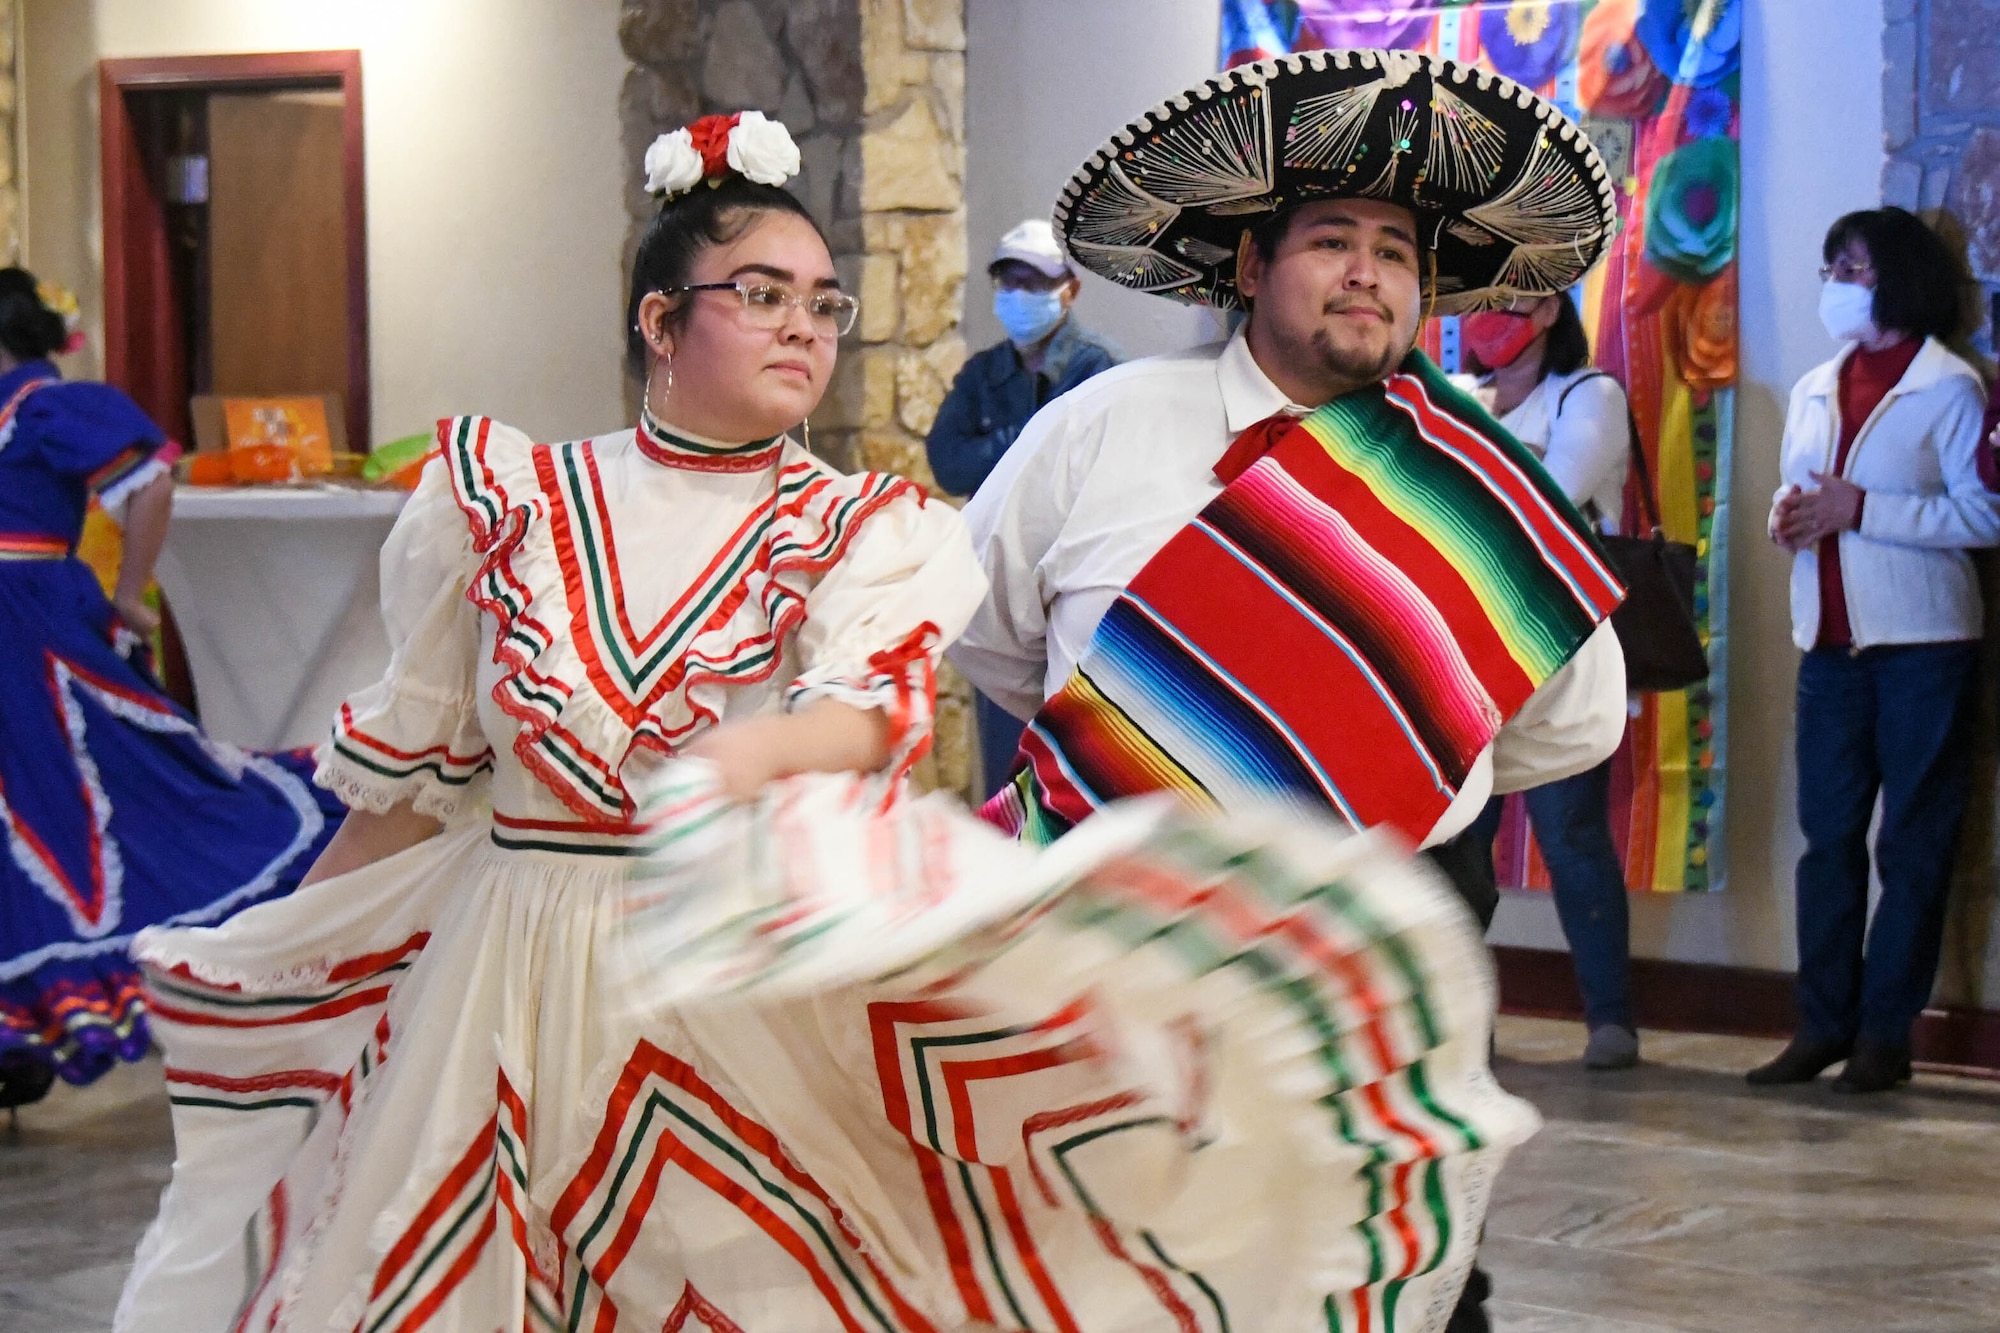 Ziclali Laylah Garcia and Alfredo Miguel Martinez, Lawton Mexican Folkloric Dance performers, celebrate Hispanic Heritage Month through dance at a fiesta on Altus Air Force Base, Oklahoma, October 15, 2021. Hispanic Heritage Month started in 1968 as Hispanic Heritage Week under President Lyndon Johnson and was expanded by President Ronald Reagan in 1988 to cover a 30-day period starting on September 15 and ending on October 15. (U.S. Air Force photo by Airman 1st Class Trenton Jancze)